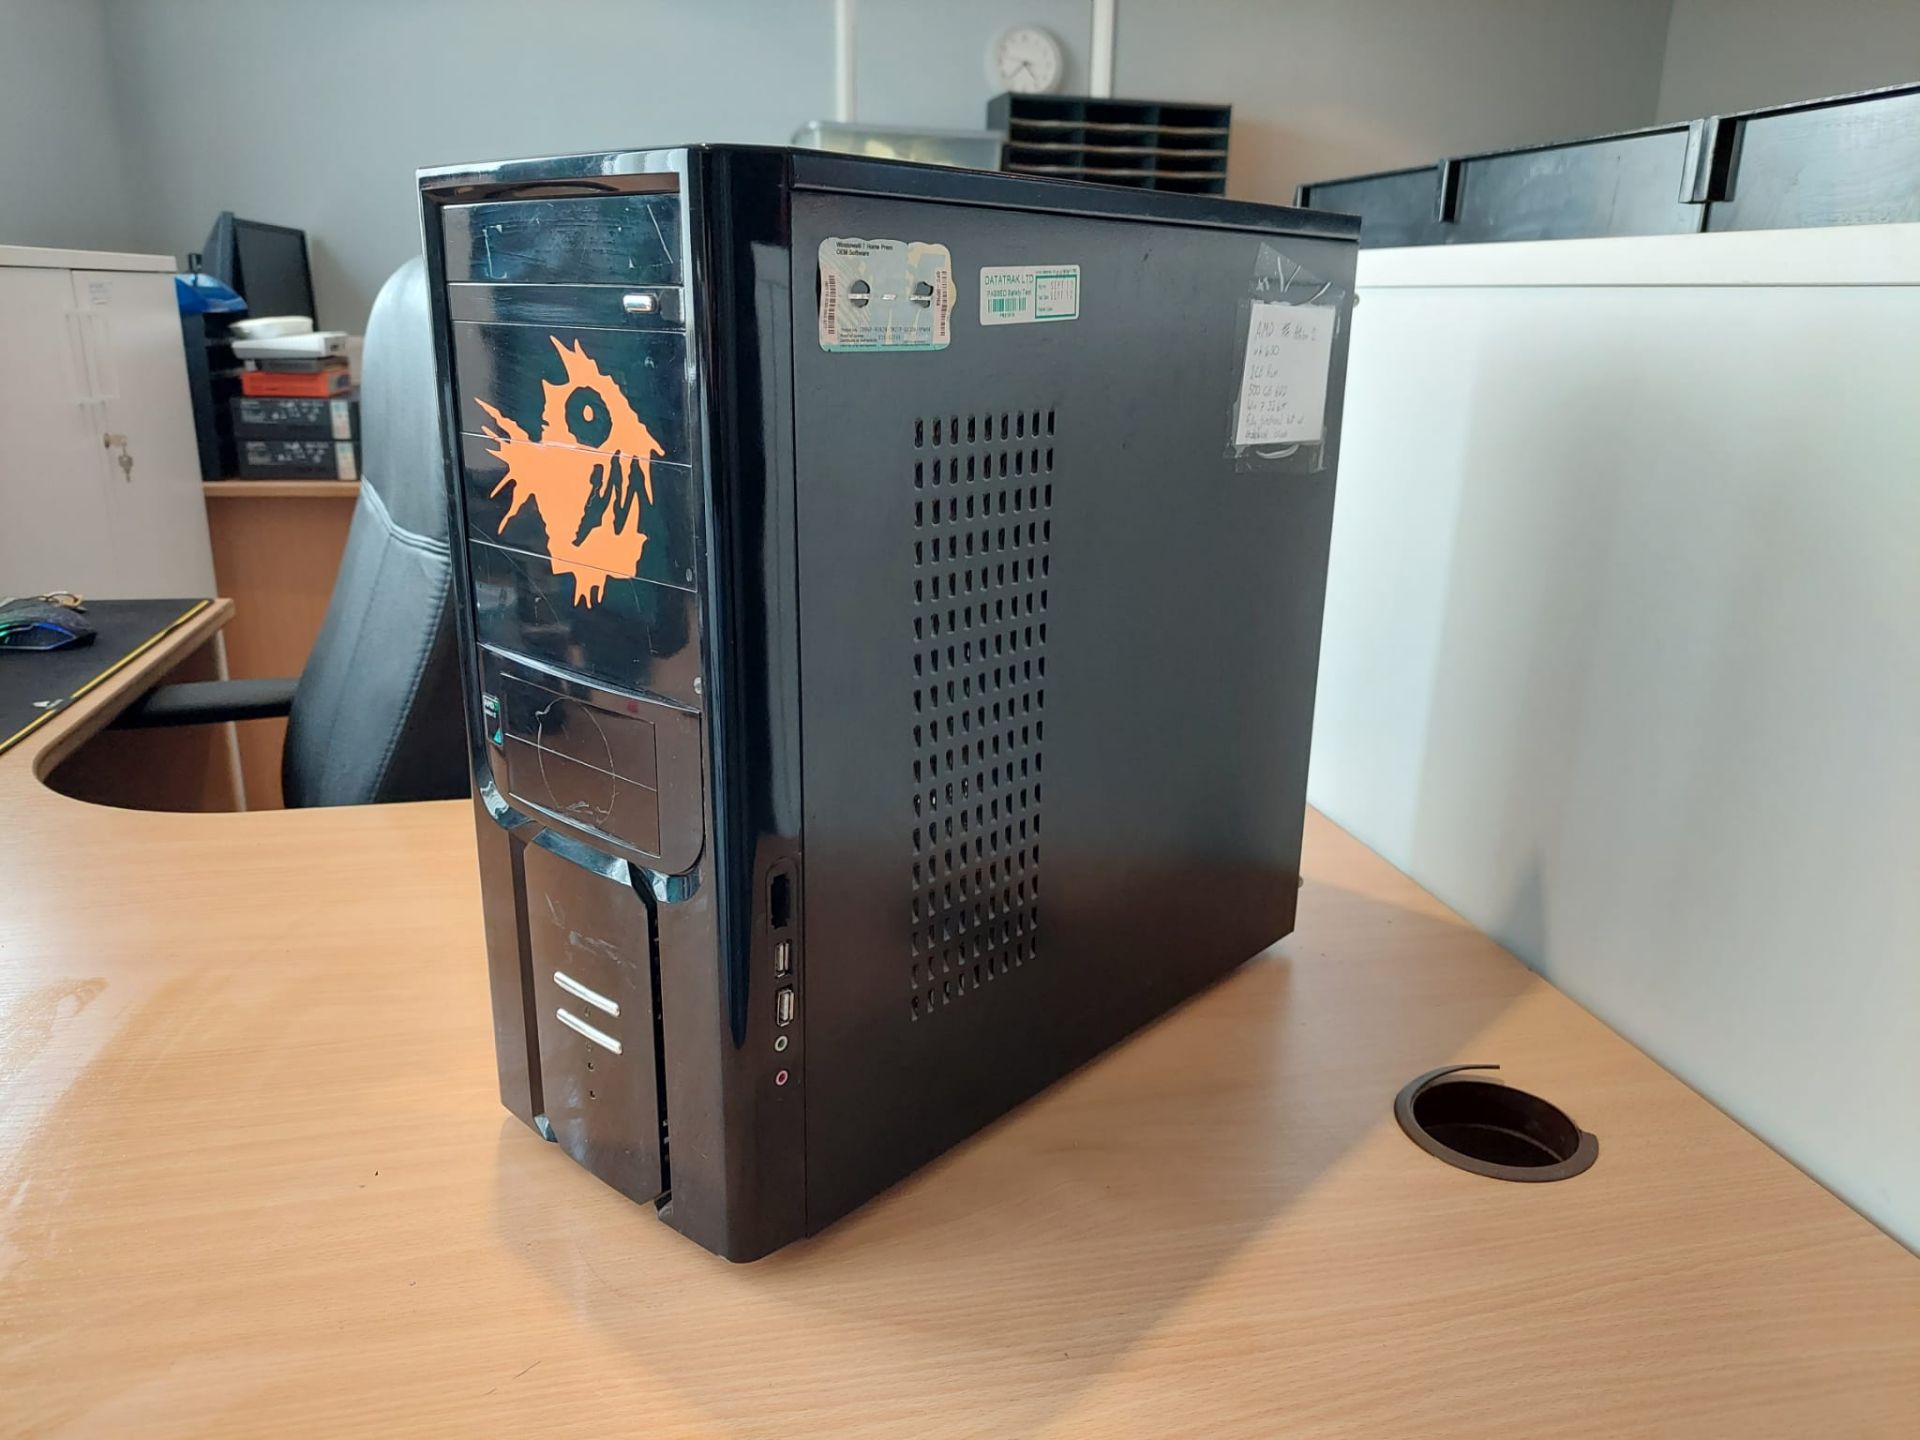 2010 Athlon II x4 360 PC (Has some issues) *NO VAT* - Image 3 of 12